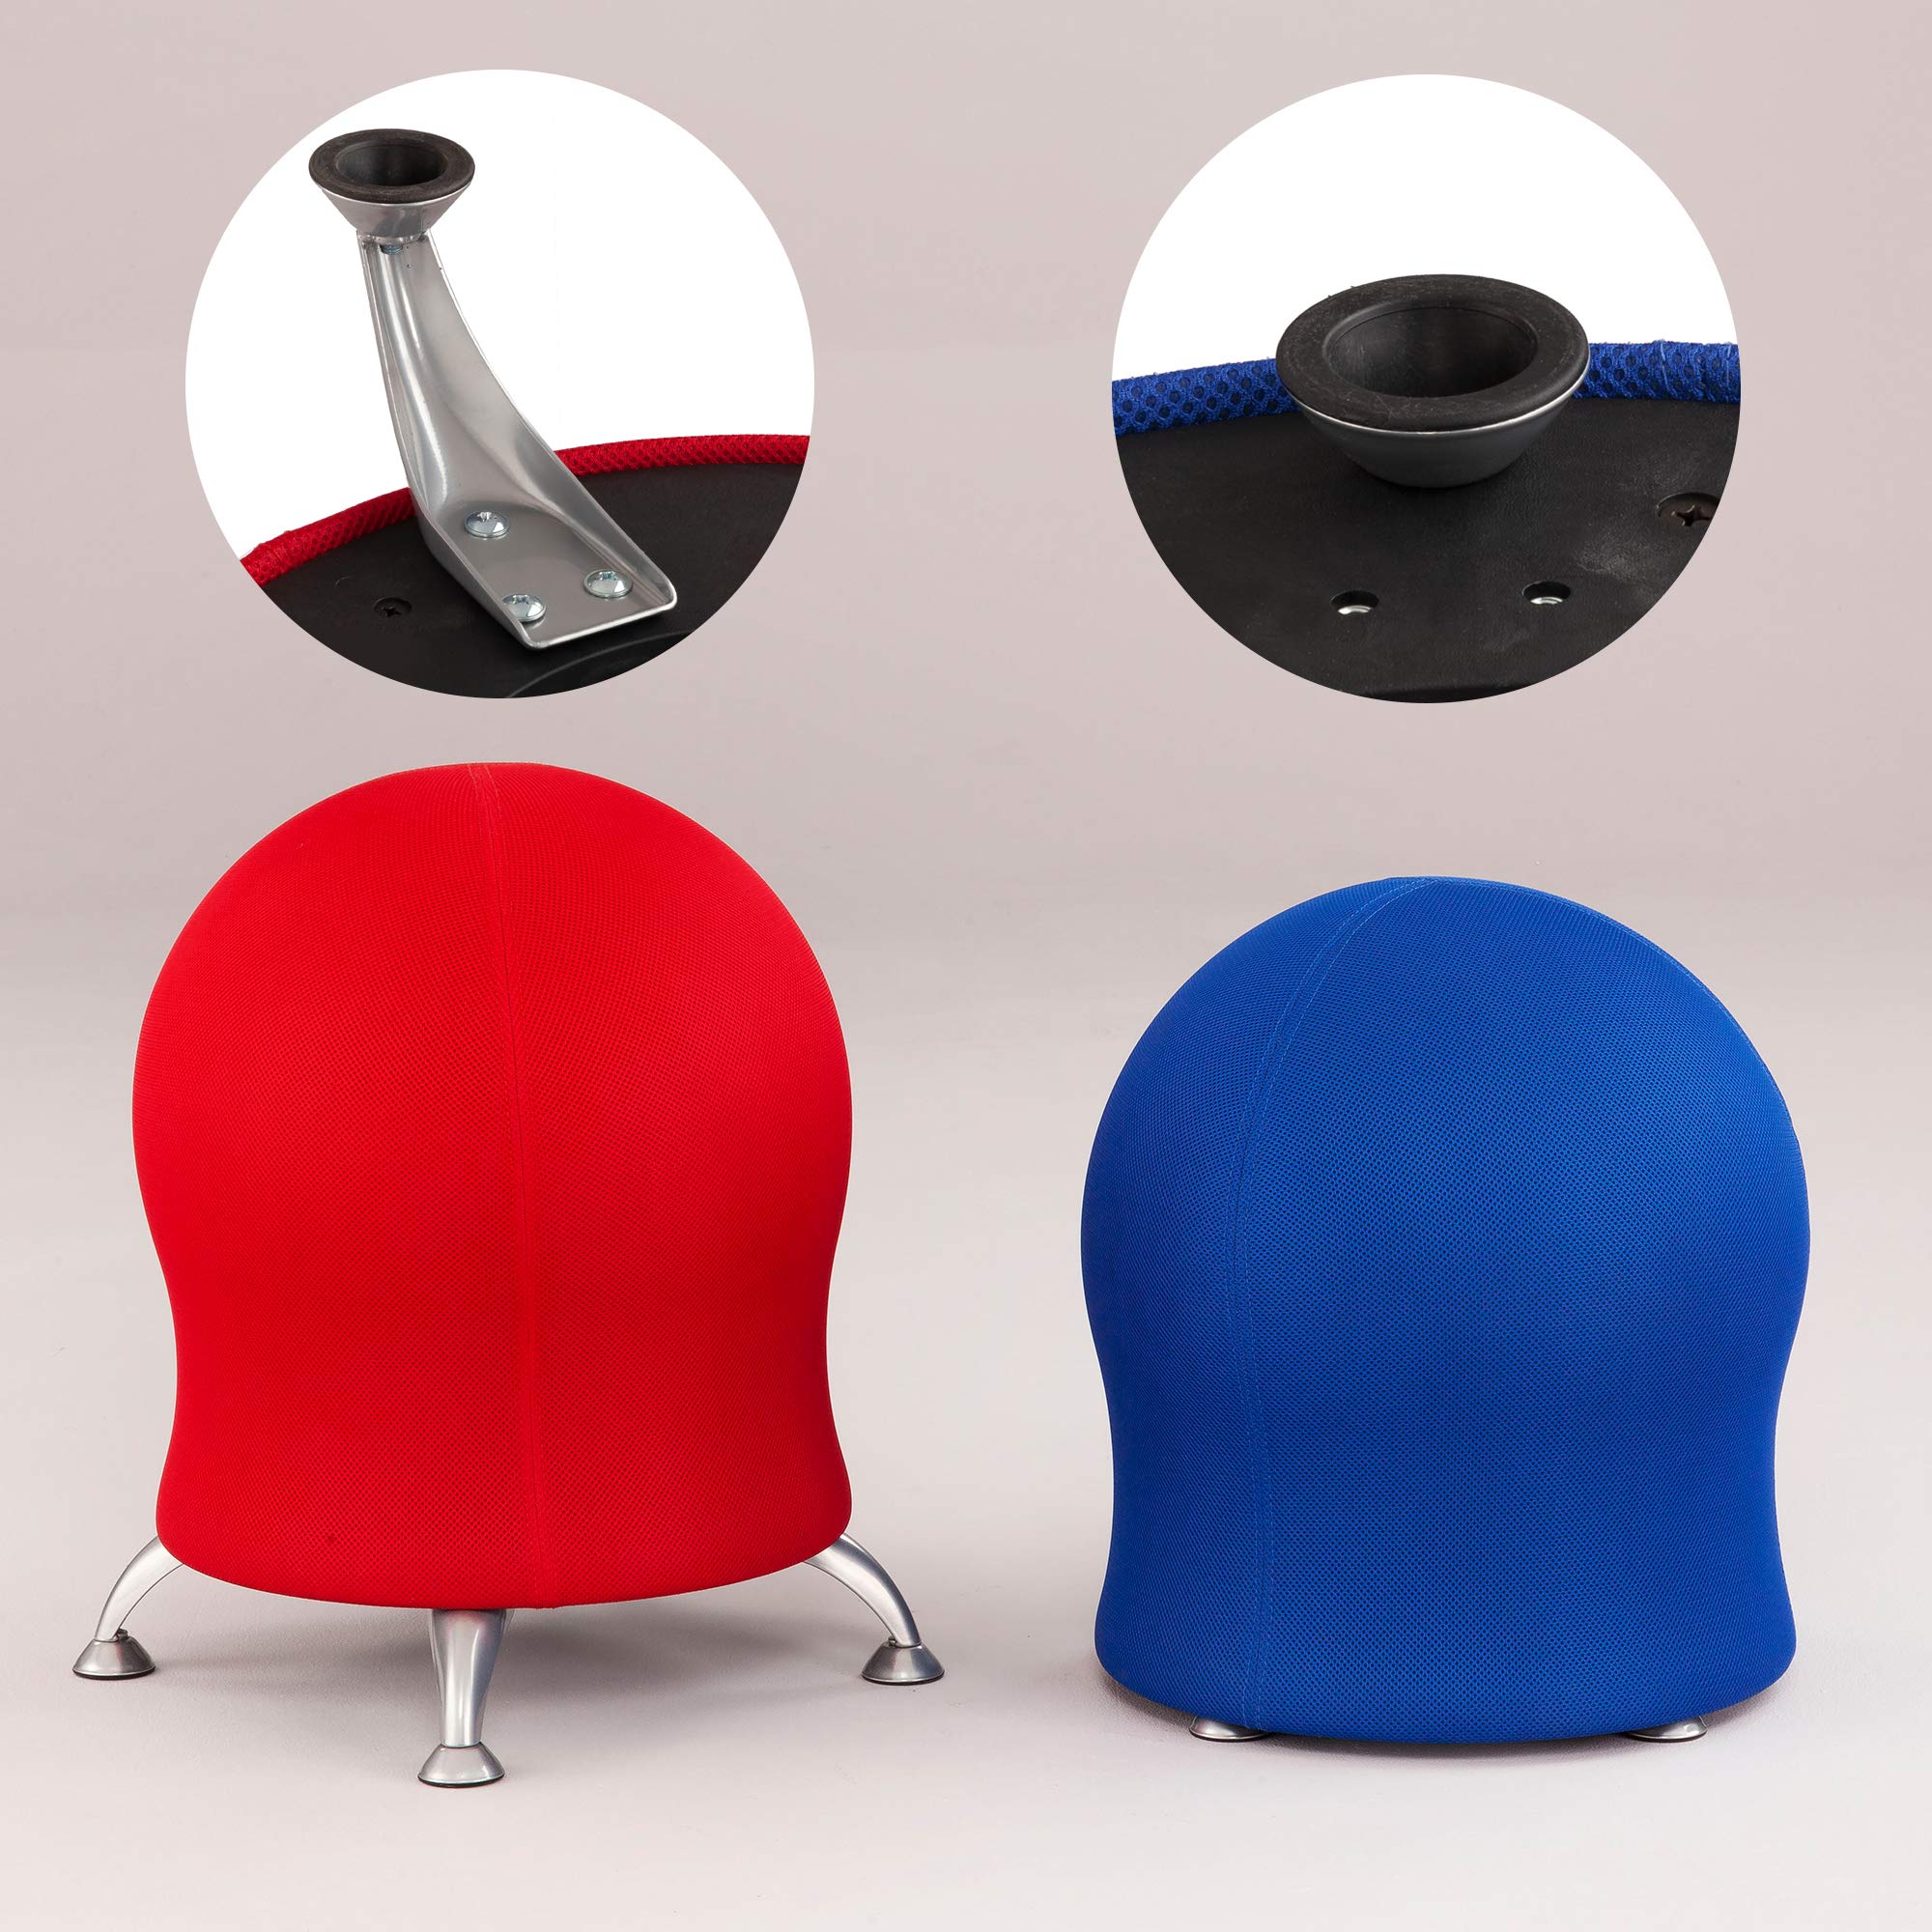 Safco Products Active Zenergy Ball Chair for Posture & Core Strength - 4 Legs & Low Profile, 250lb Capacity. For Home, Office and Classroom